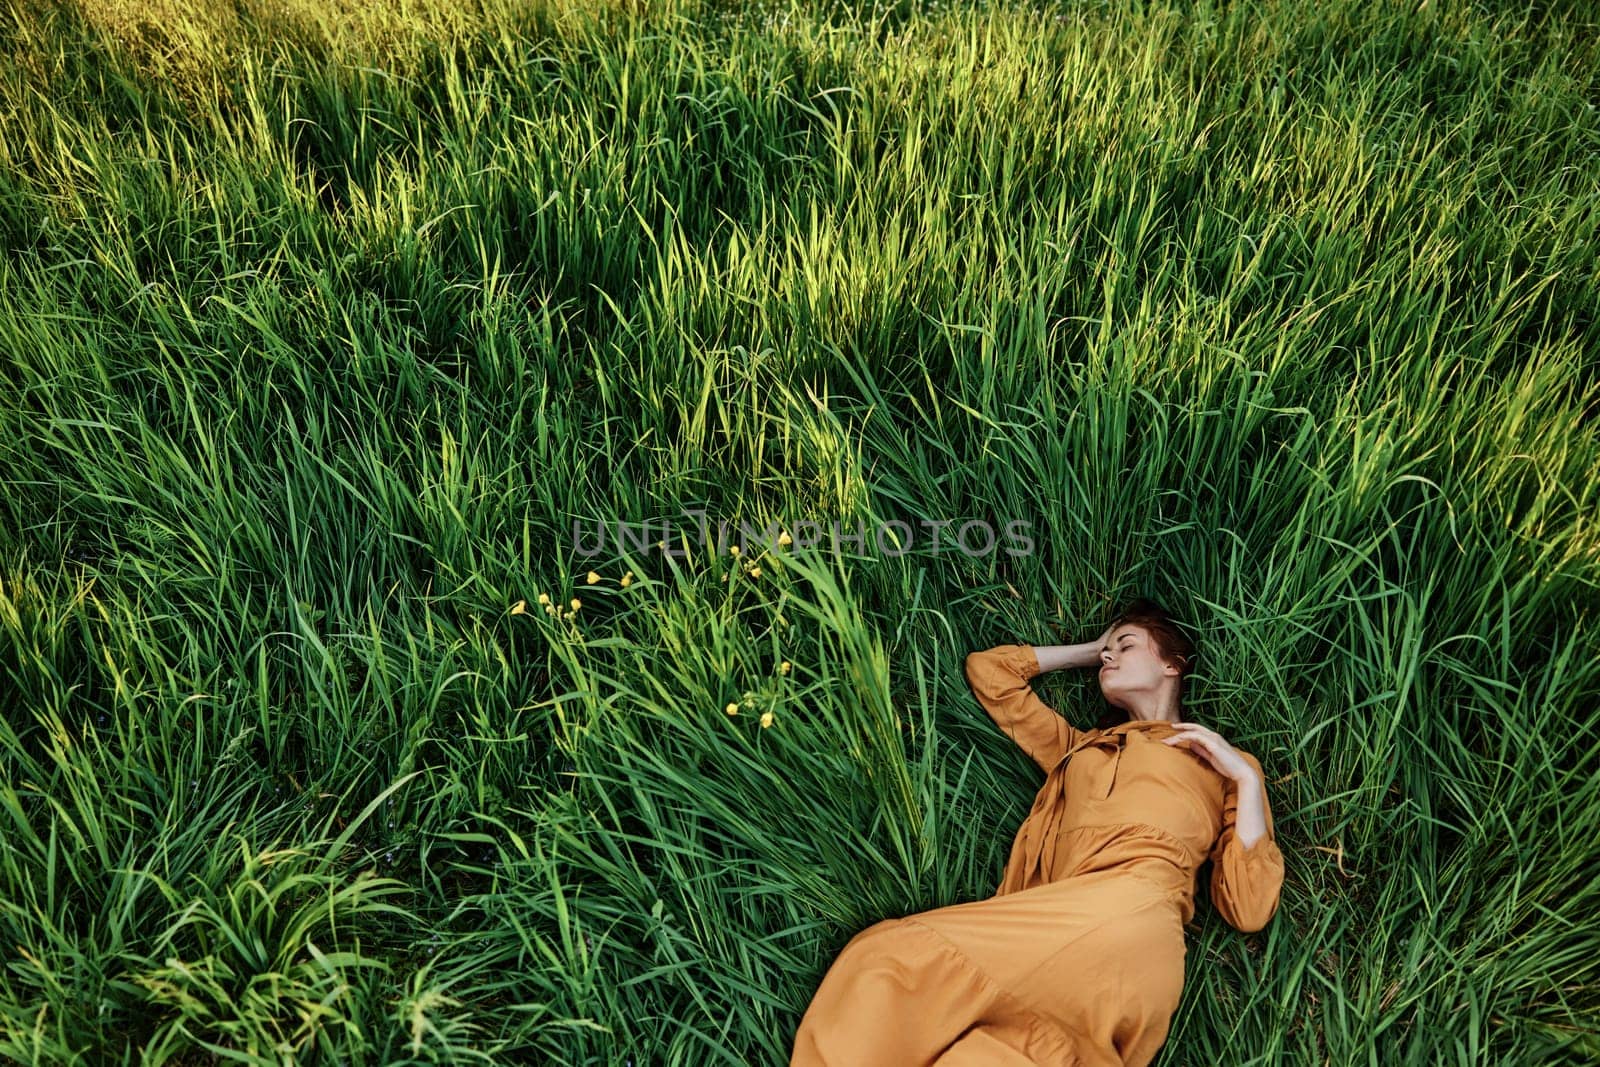 a sweet, calm woman in an orange dress lies in a green field enjoying the silence and peace. Horizontal photo taken from above by Vichizh